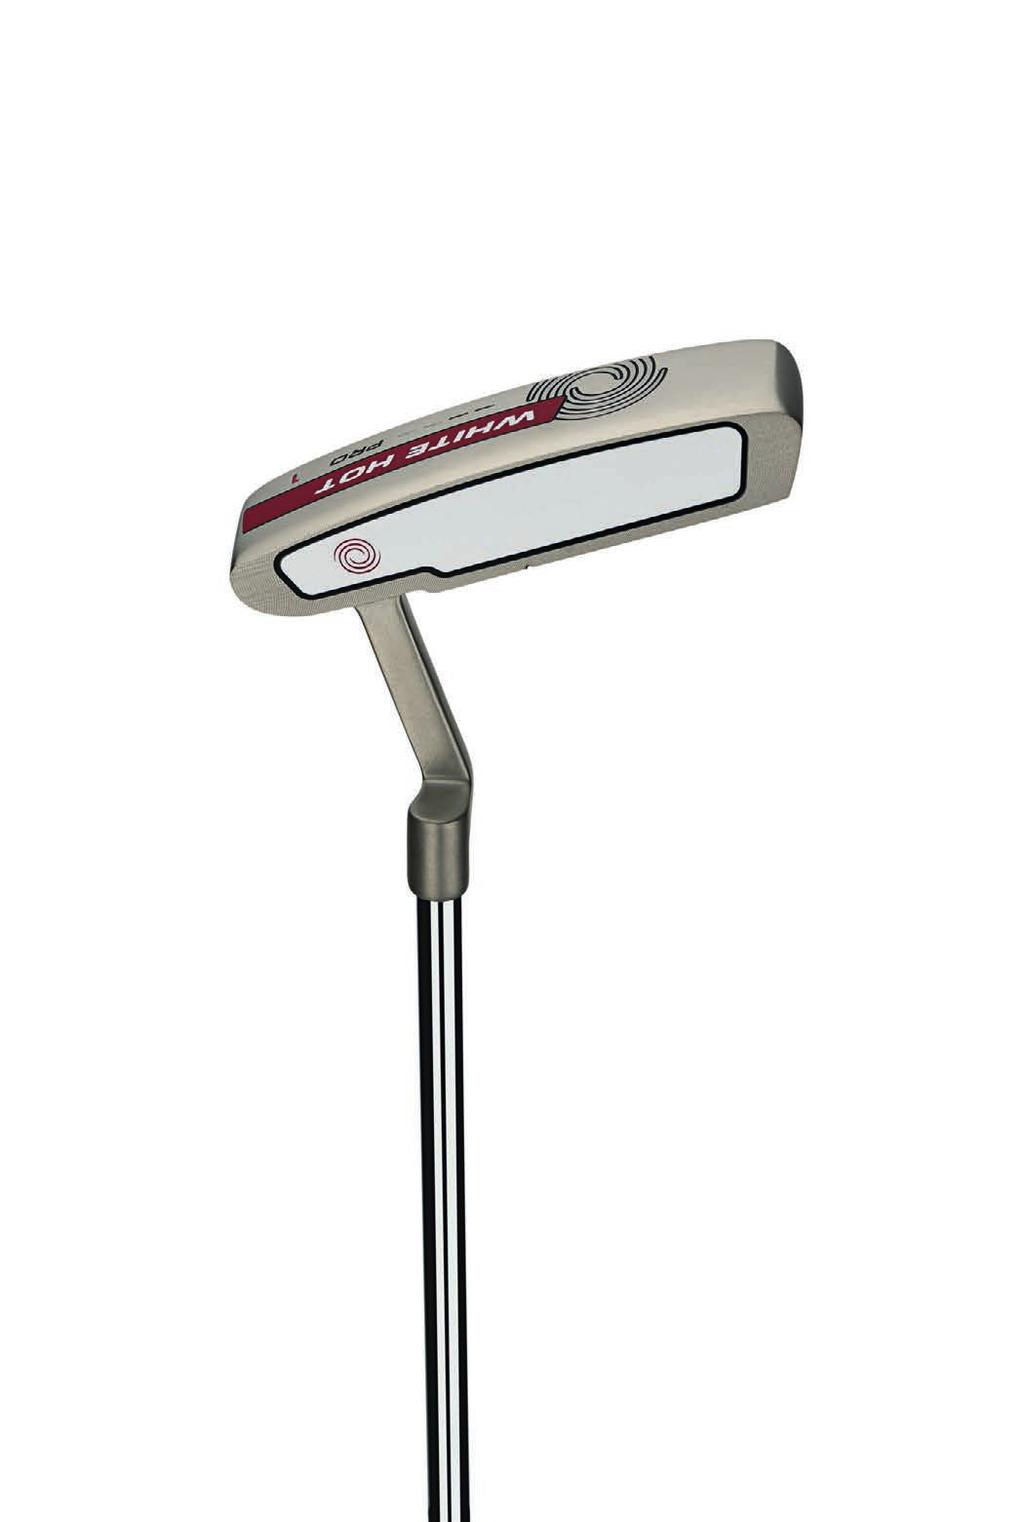 ODYSSEY PUTTERS WHITE HOT PRO 2.0 #1 In the White Hot Pro 2.